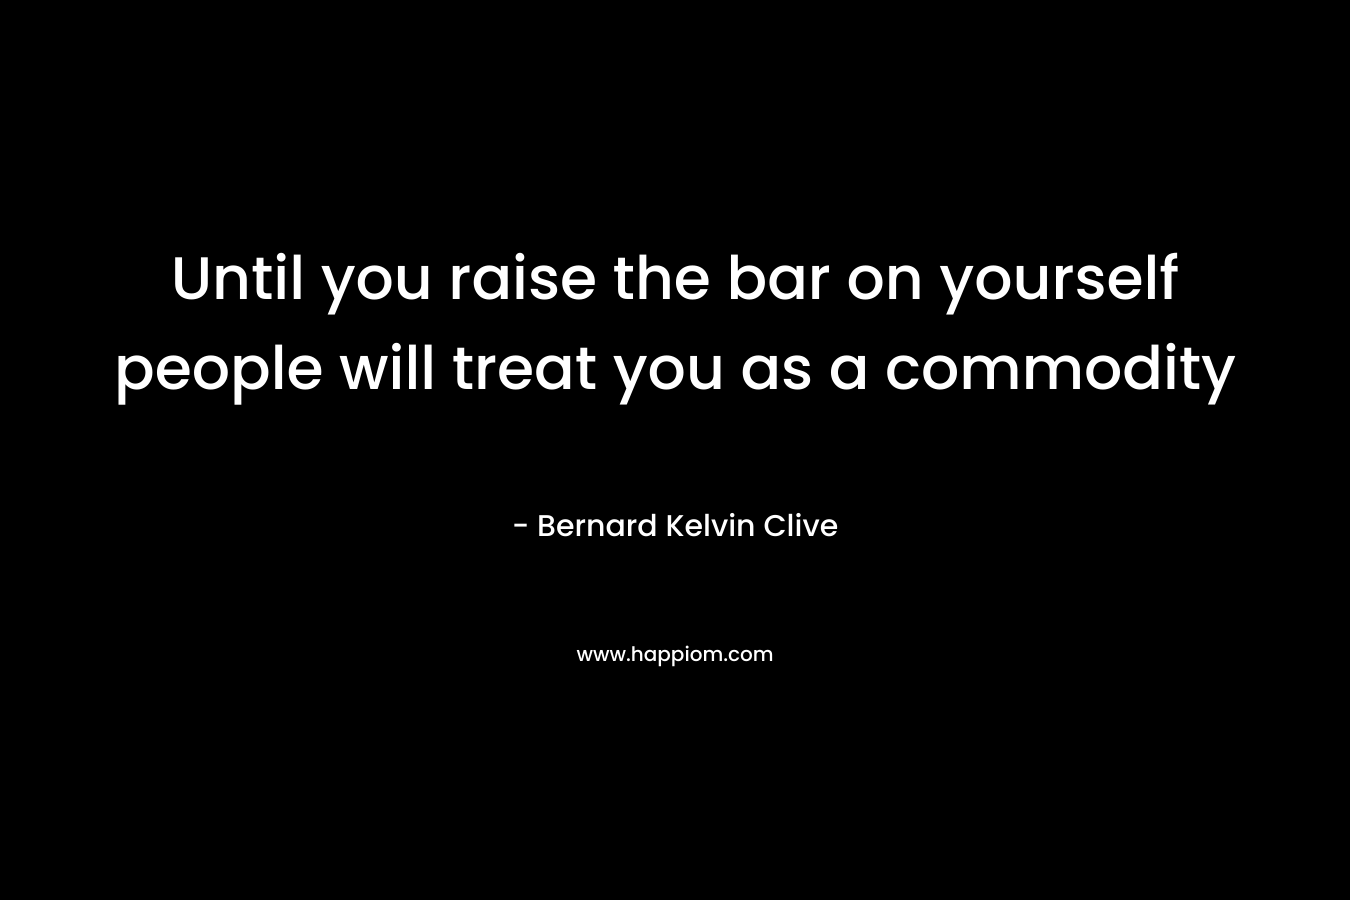 Until you raise the bar on yourself people will treat you as a commodity